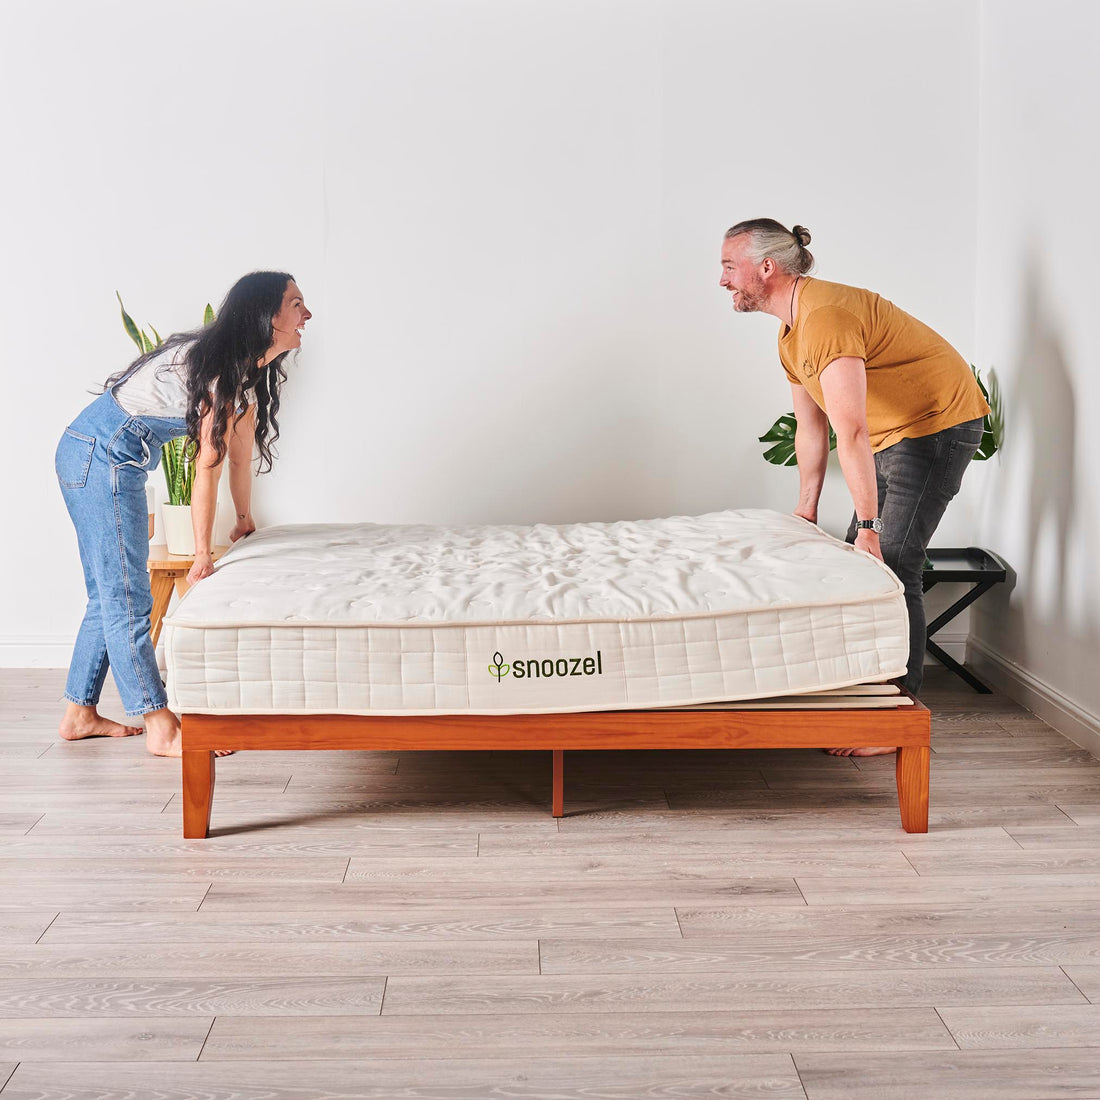 Smiling couple set up their new snoozel green matter on a wooden bed frame